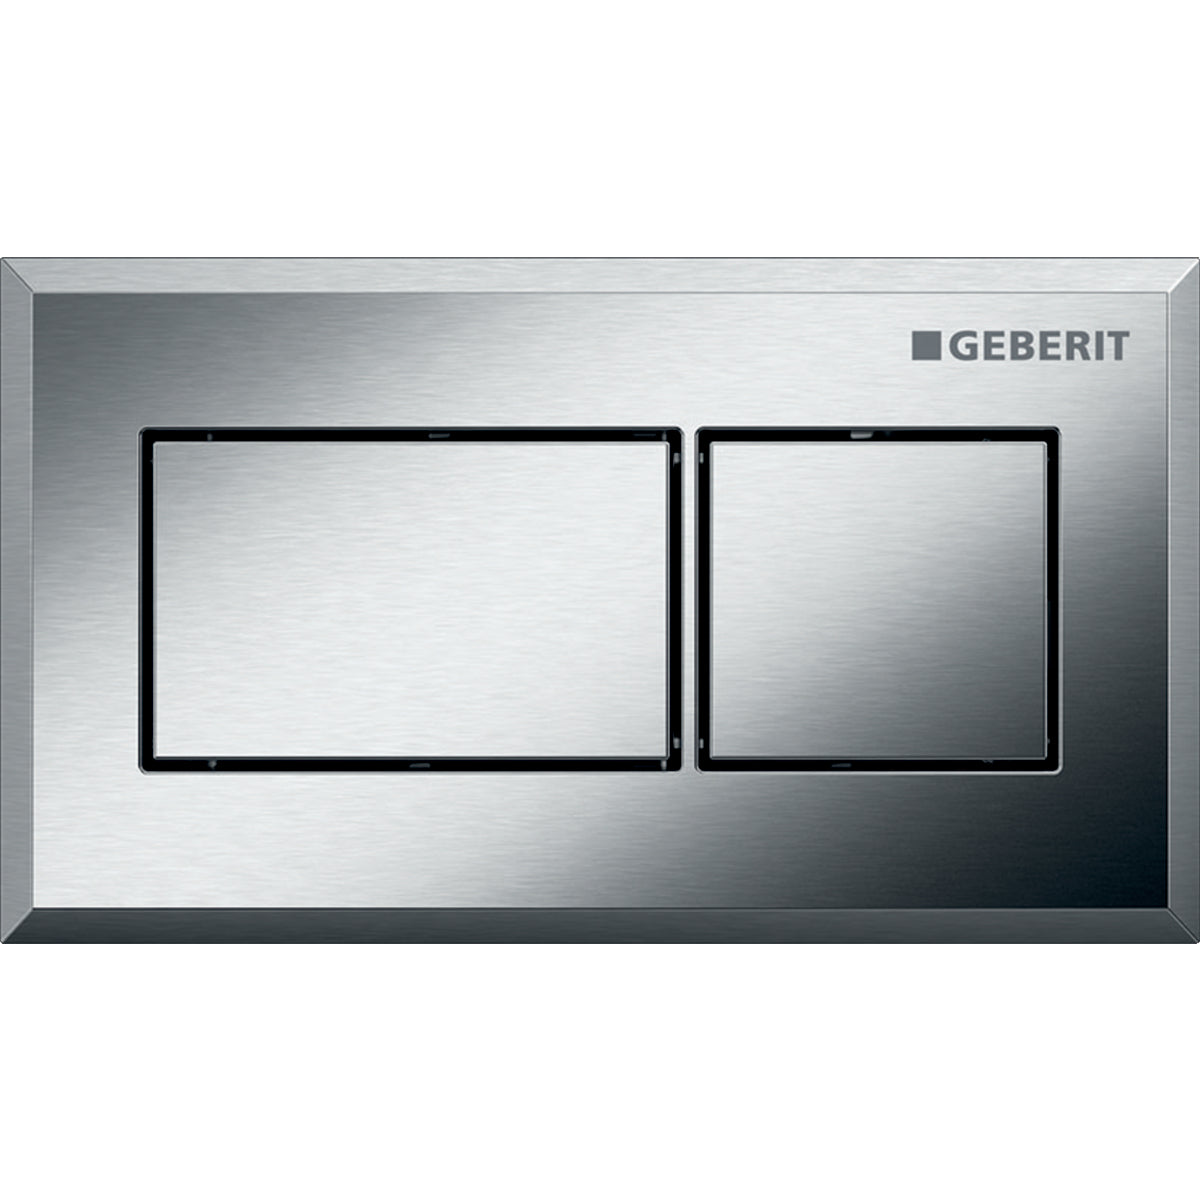 Geberit 116.053.GH.1- Geberit remote flush actuation, square design, pneumatic, for dual flush, for Sigma concealed cistern 8 cm, concealed actuator: chrome-plated, brushed, easy-to-clean coated - FaucetExpress.ca